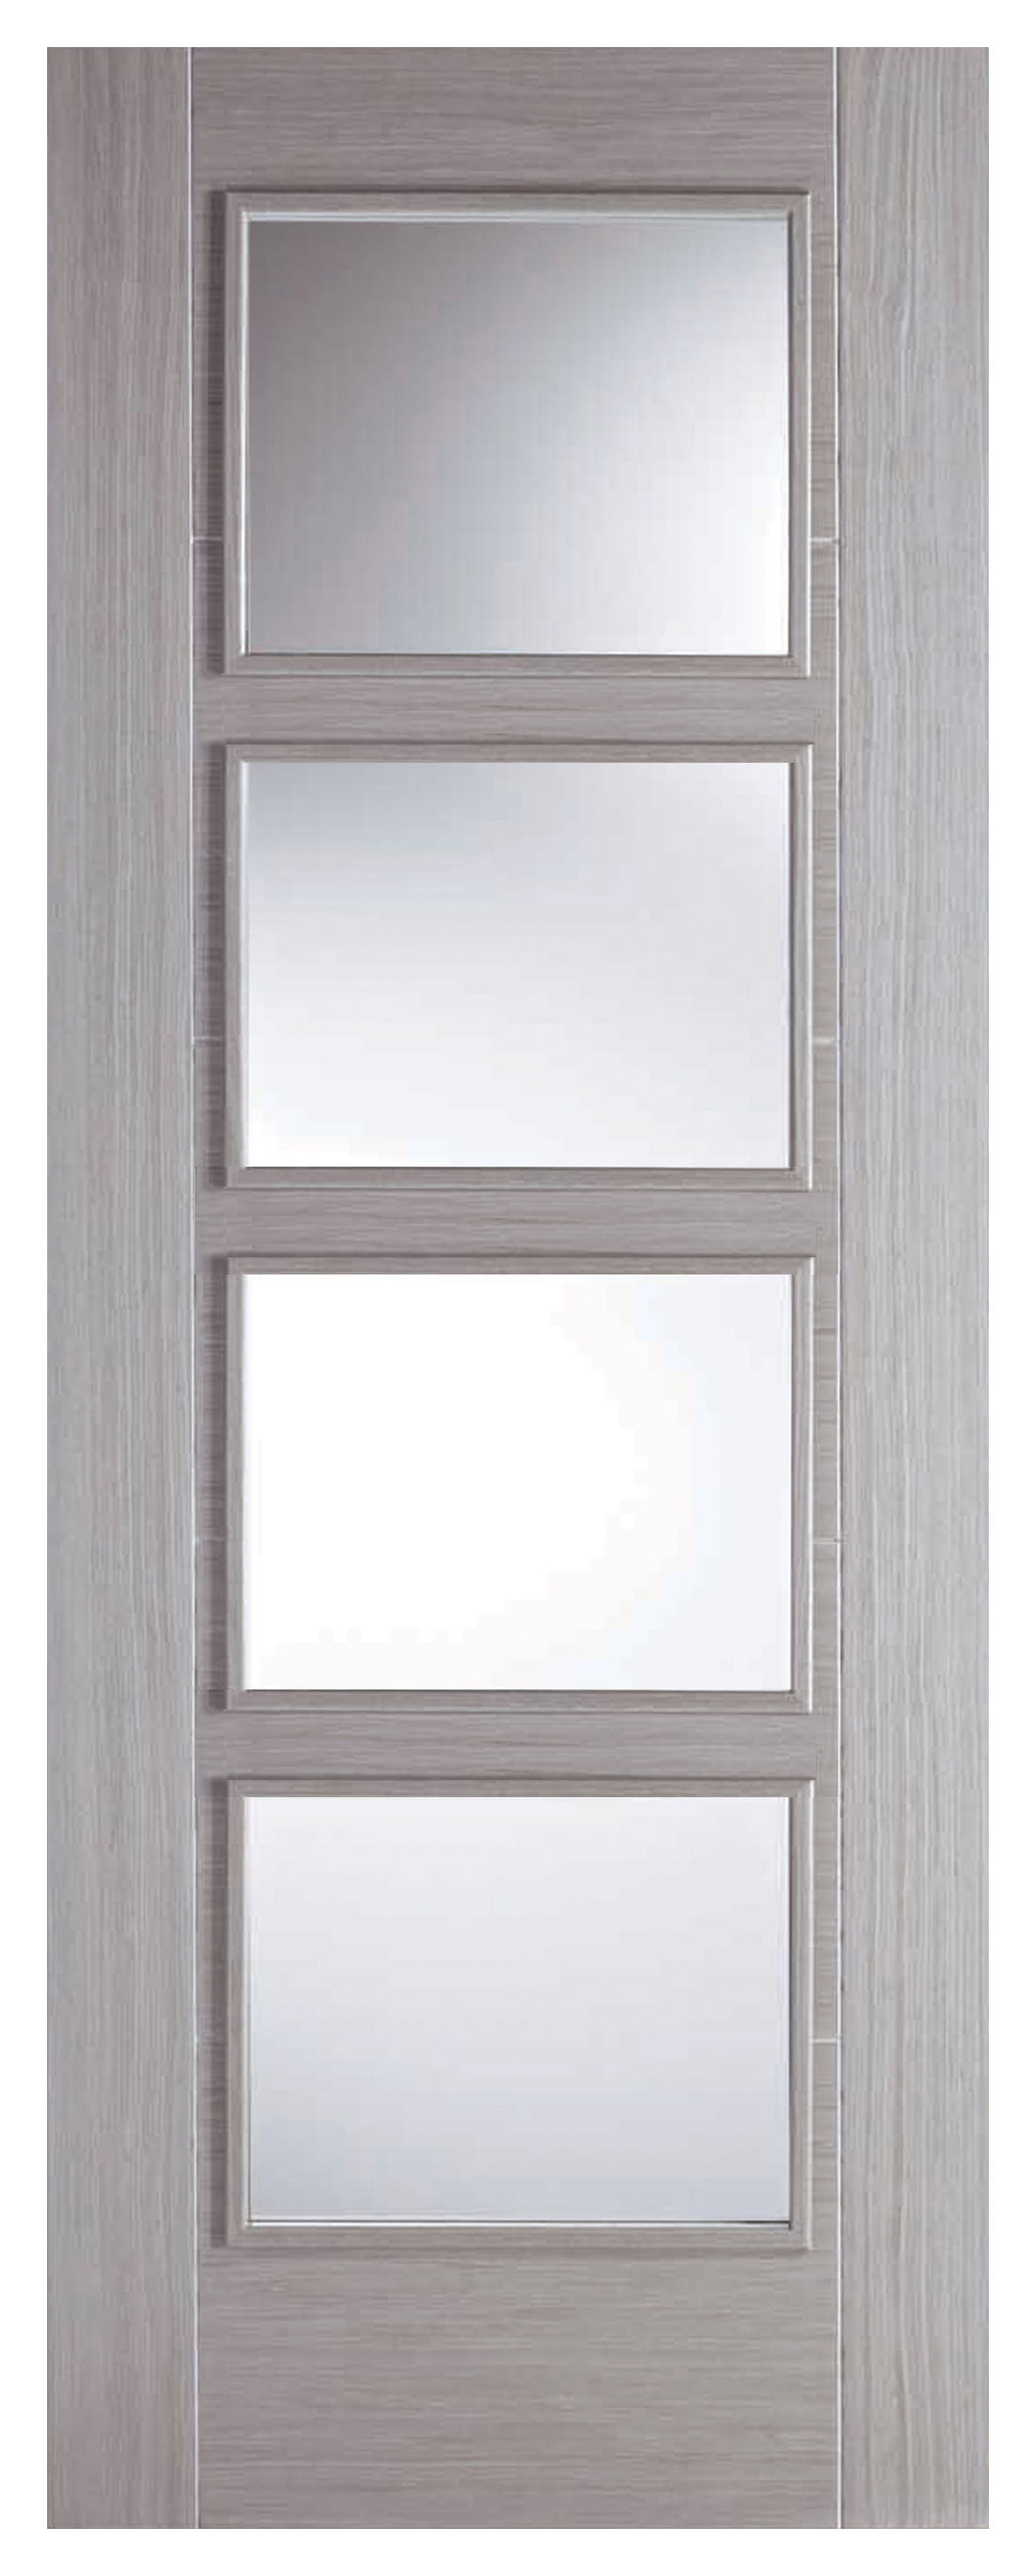 Image of LPD Internal Vancouver 4 Lite Pre-Finished Light Grey FD30 Fire Door - 762 x 1981mm